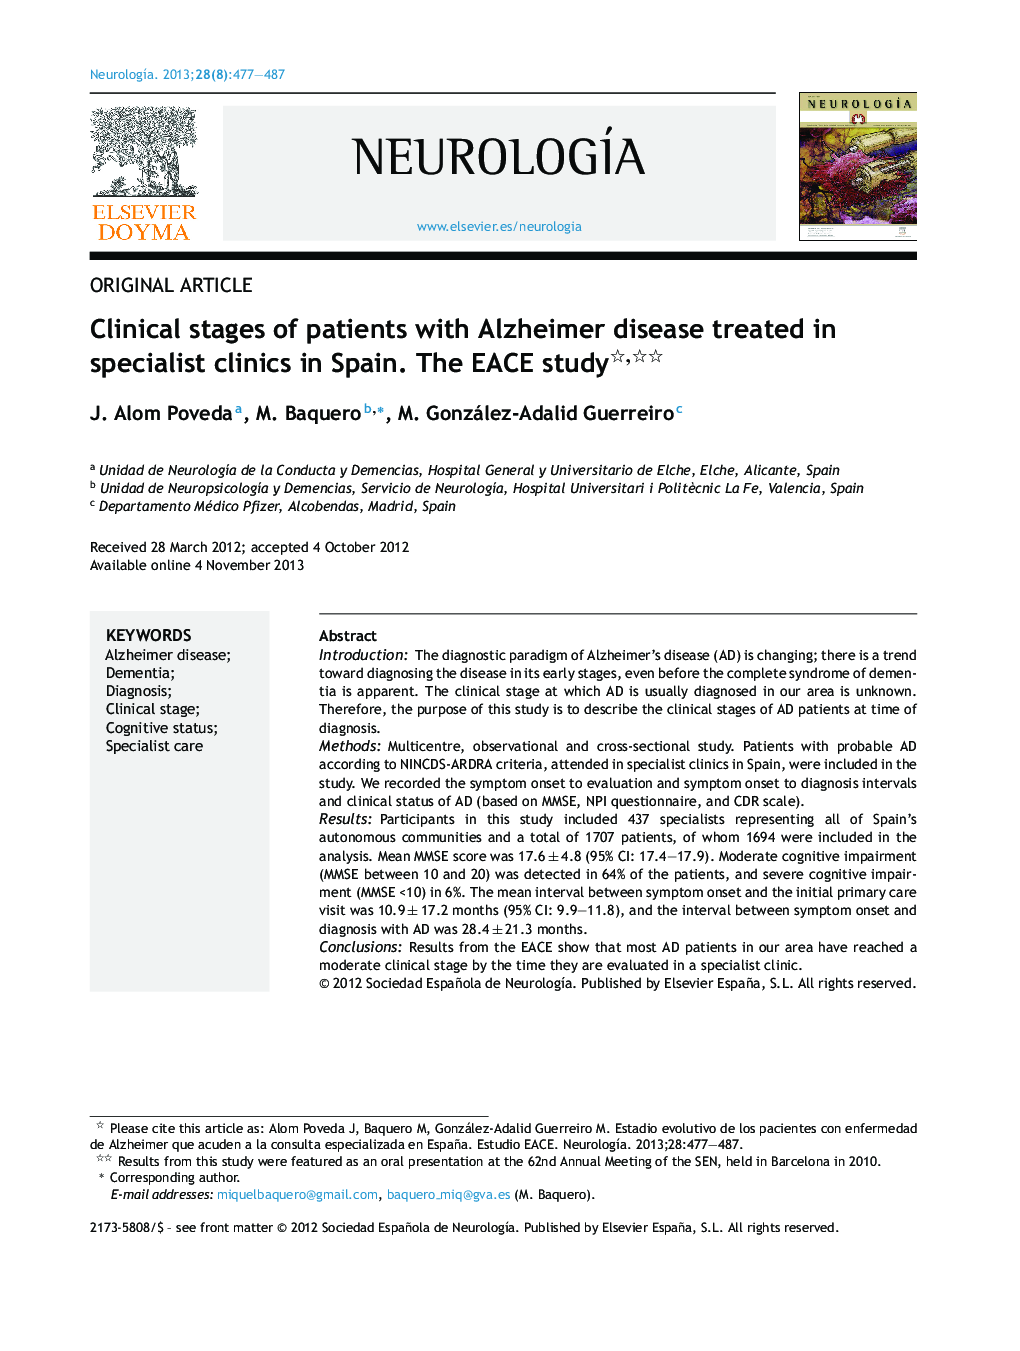 Clinical stages of patients with Alzheimer disease treated in specialist clinics in Spain. The EACE study